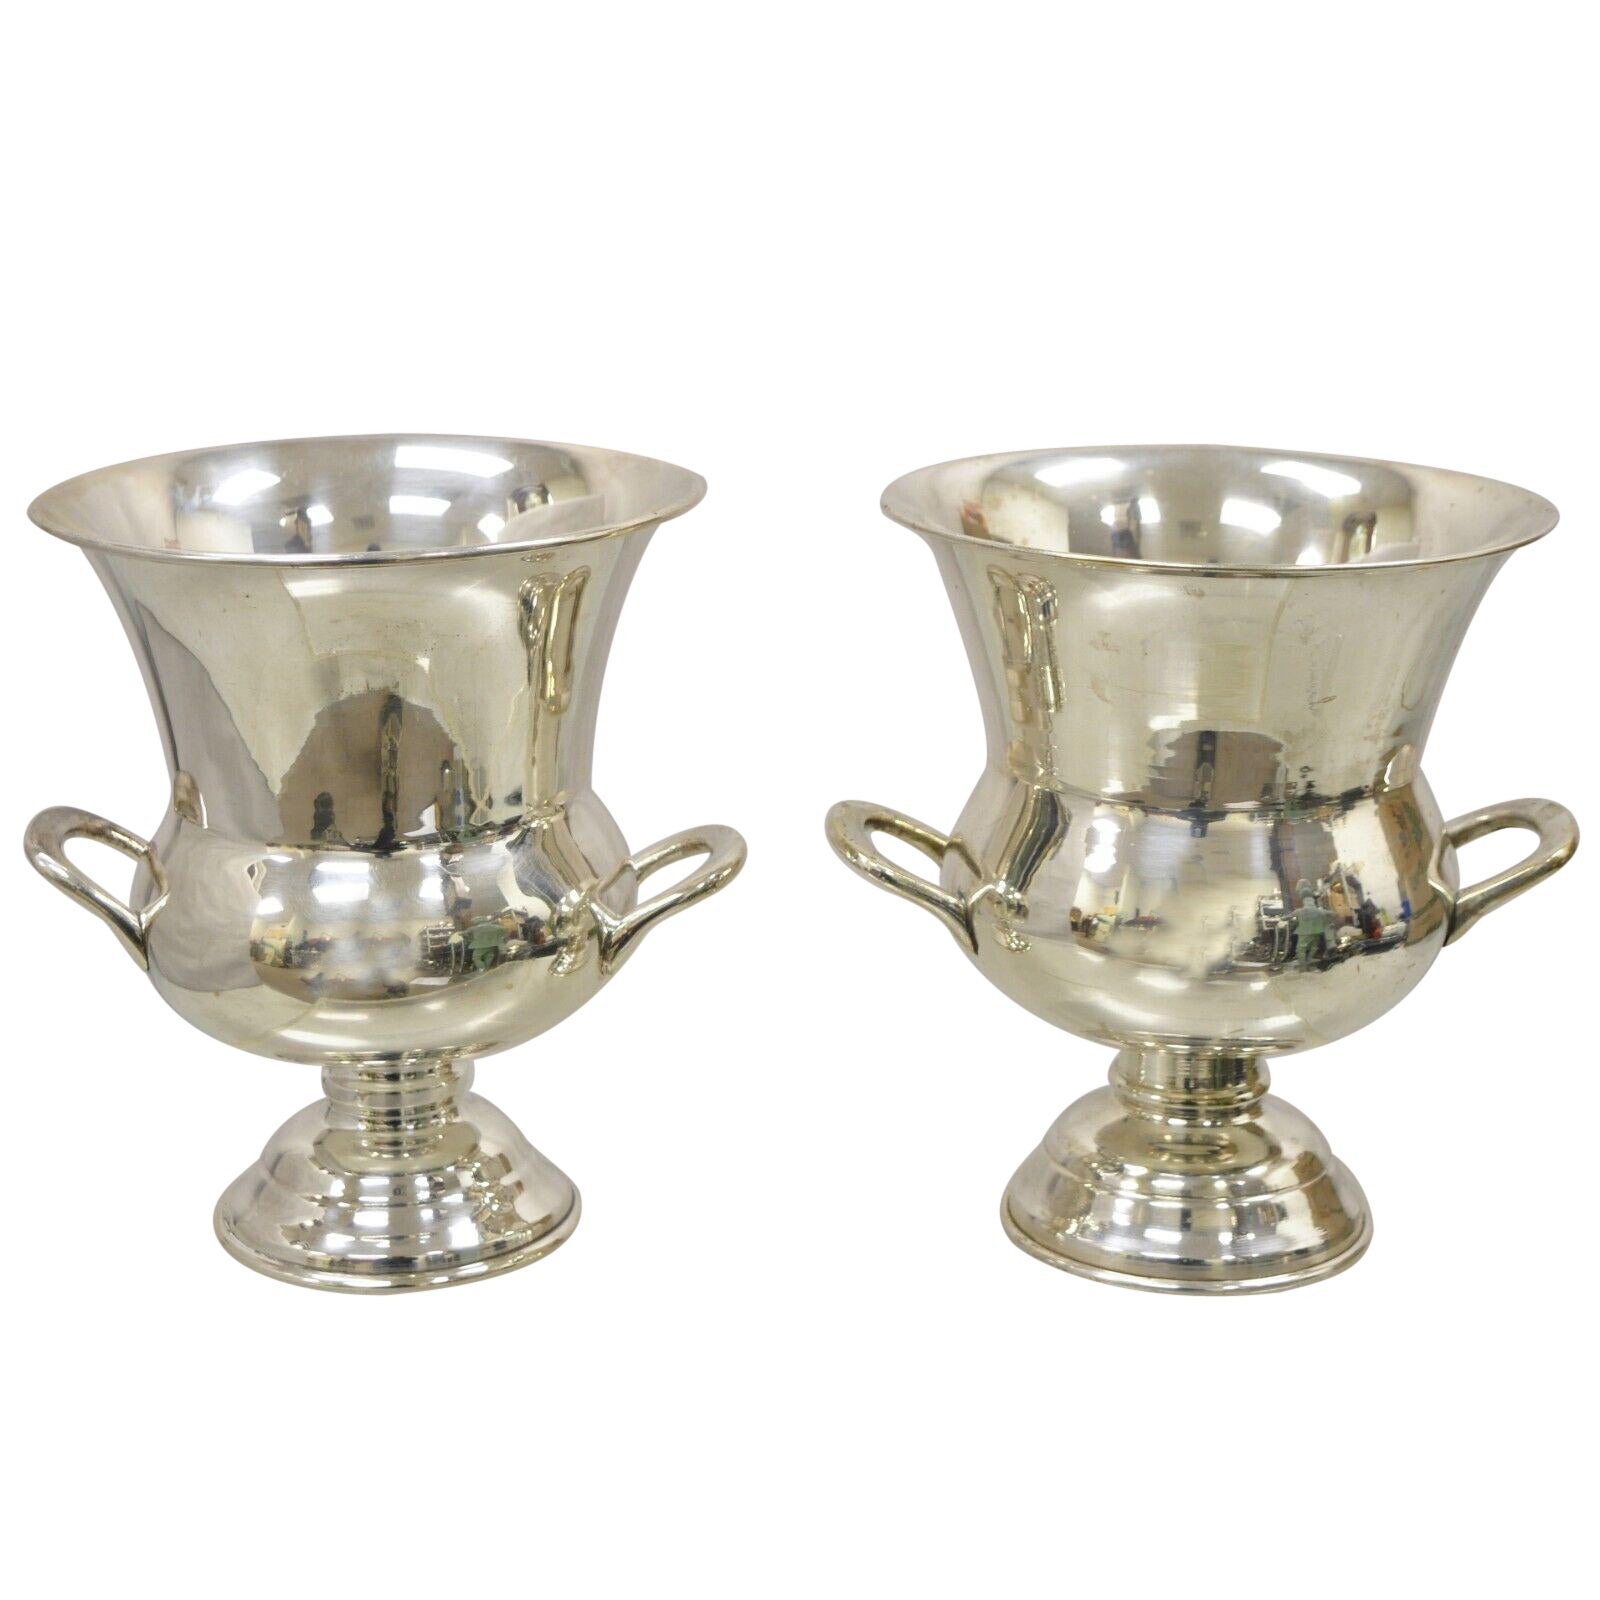 Vintage Leonard Silver Plated Trophy Cup Ice Bucket Champagne Chiller, a Pair For Sale